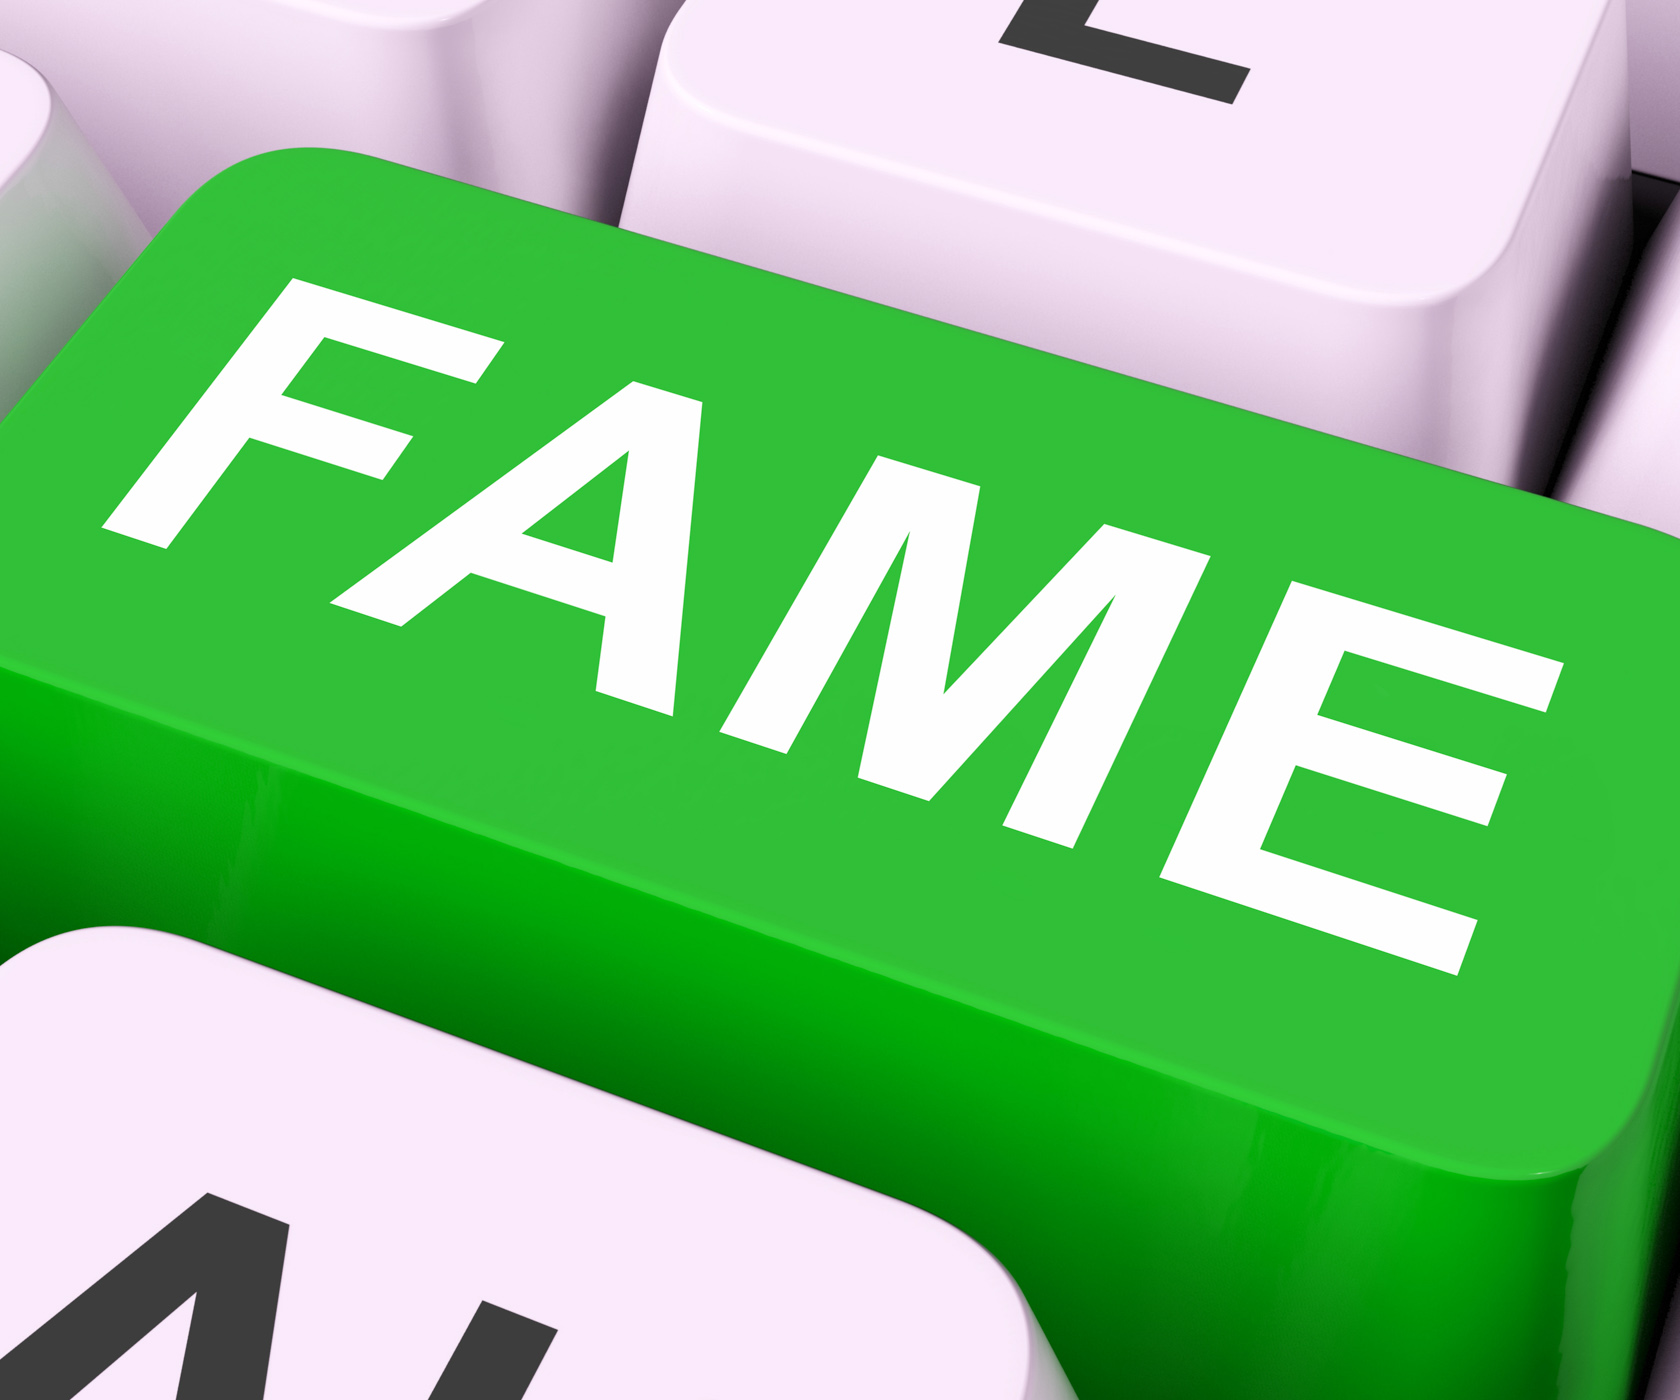 Fame keys mean renowned or popular photo